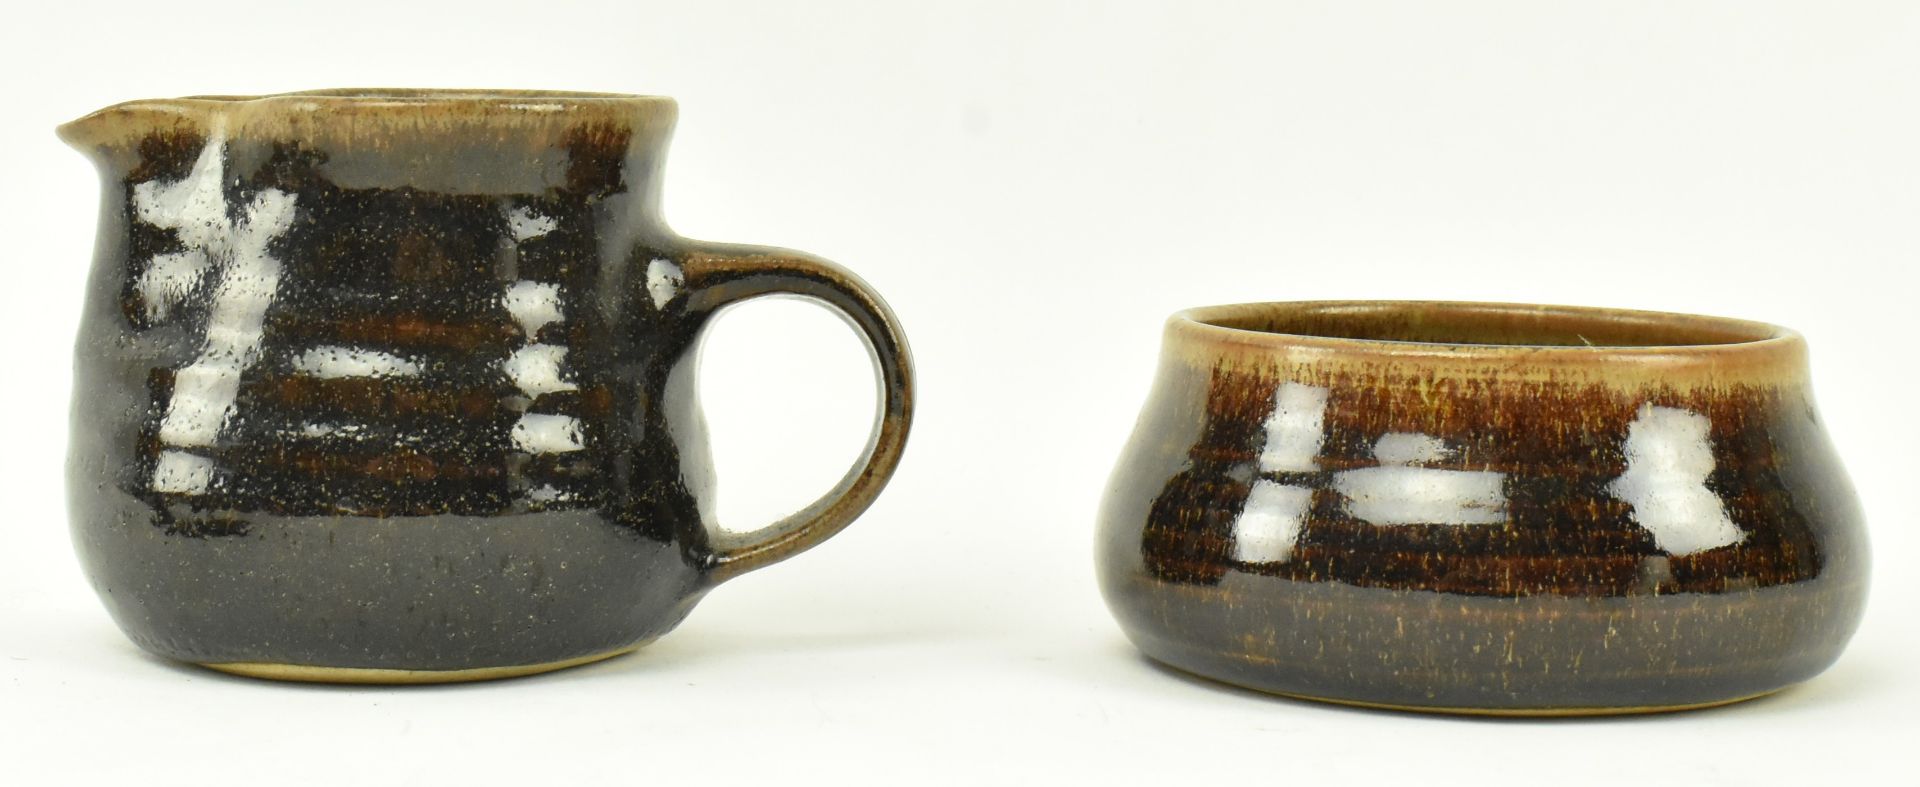 SCOTT MARSHALL - BOSCEAN POTTERY - SET OF SIX CUPS & SAUCERS - Image 6 of 8